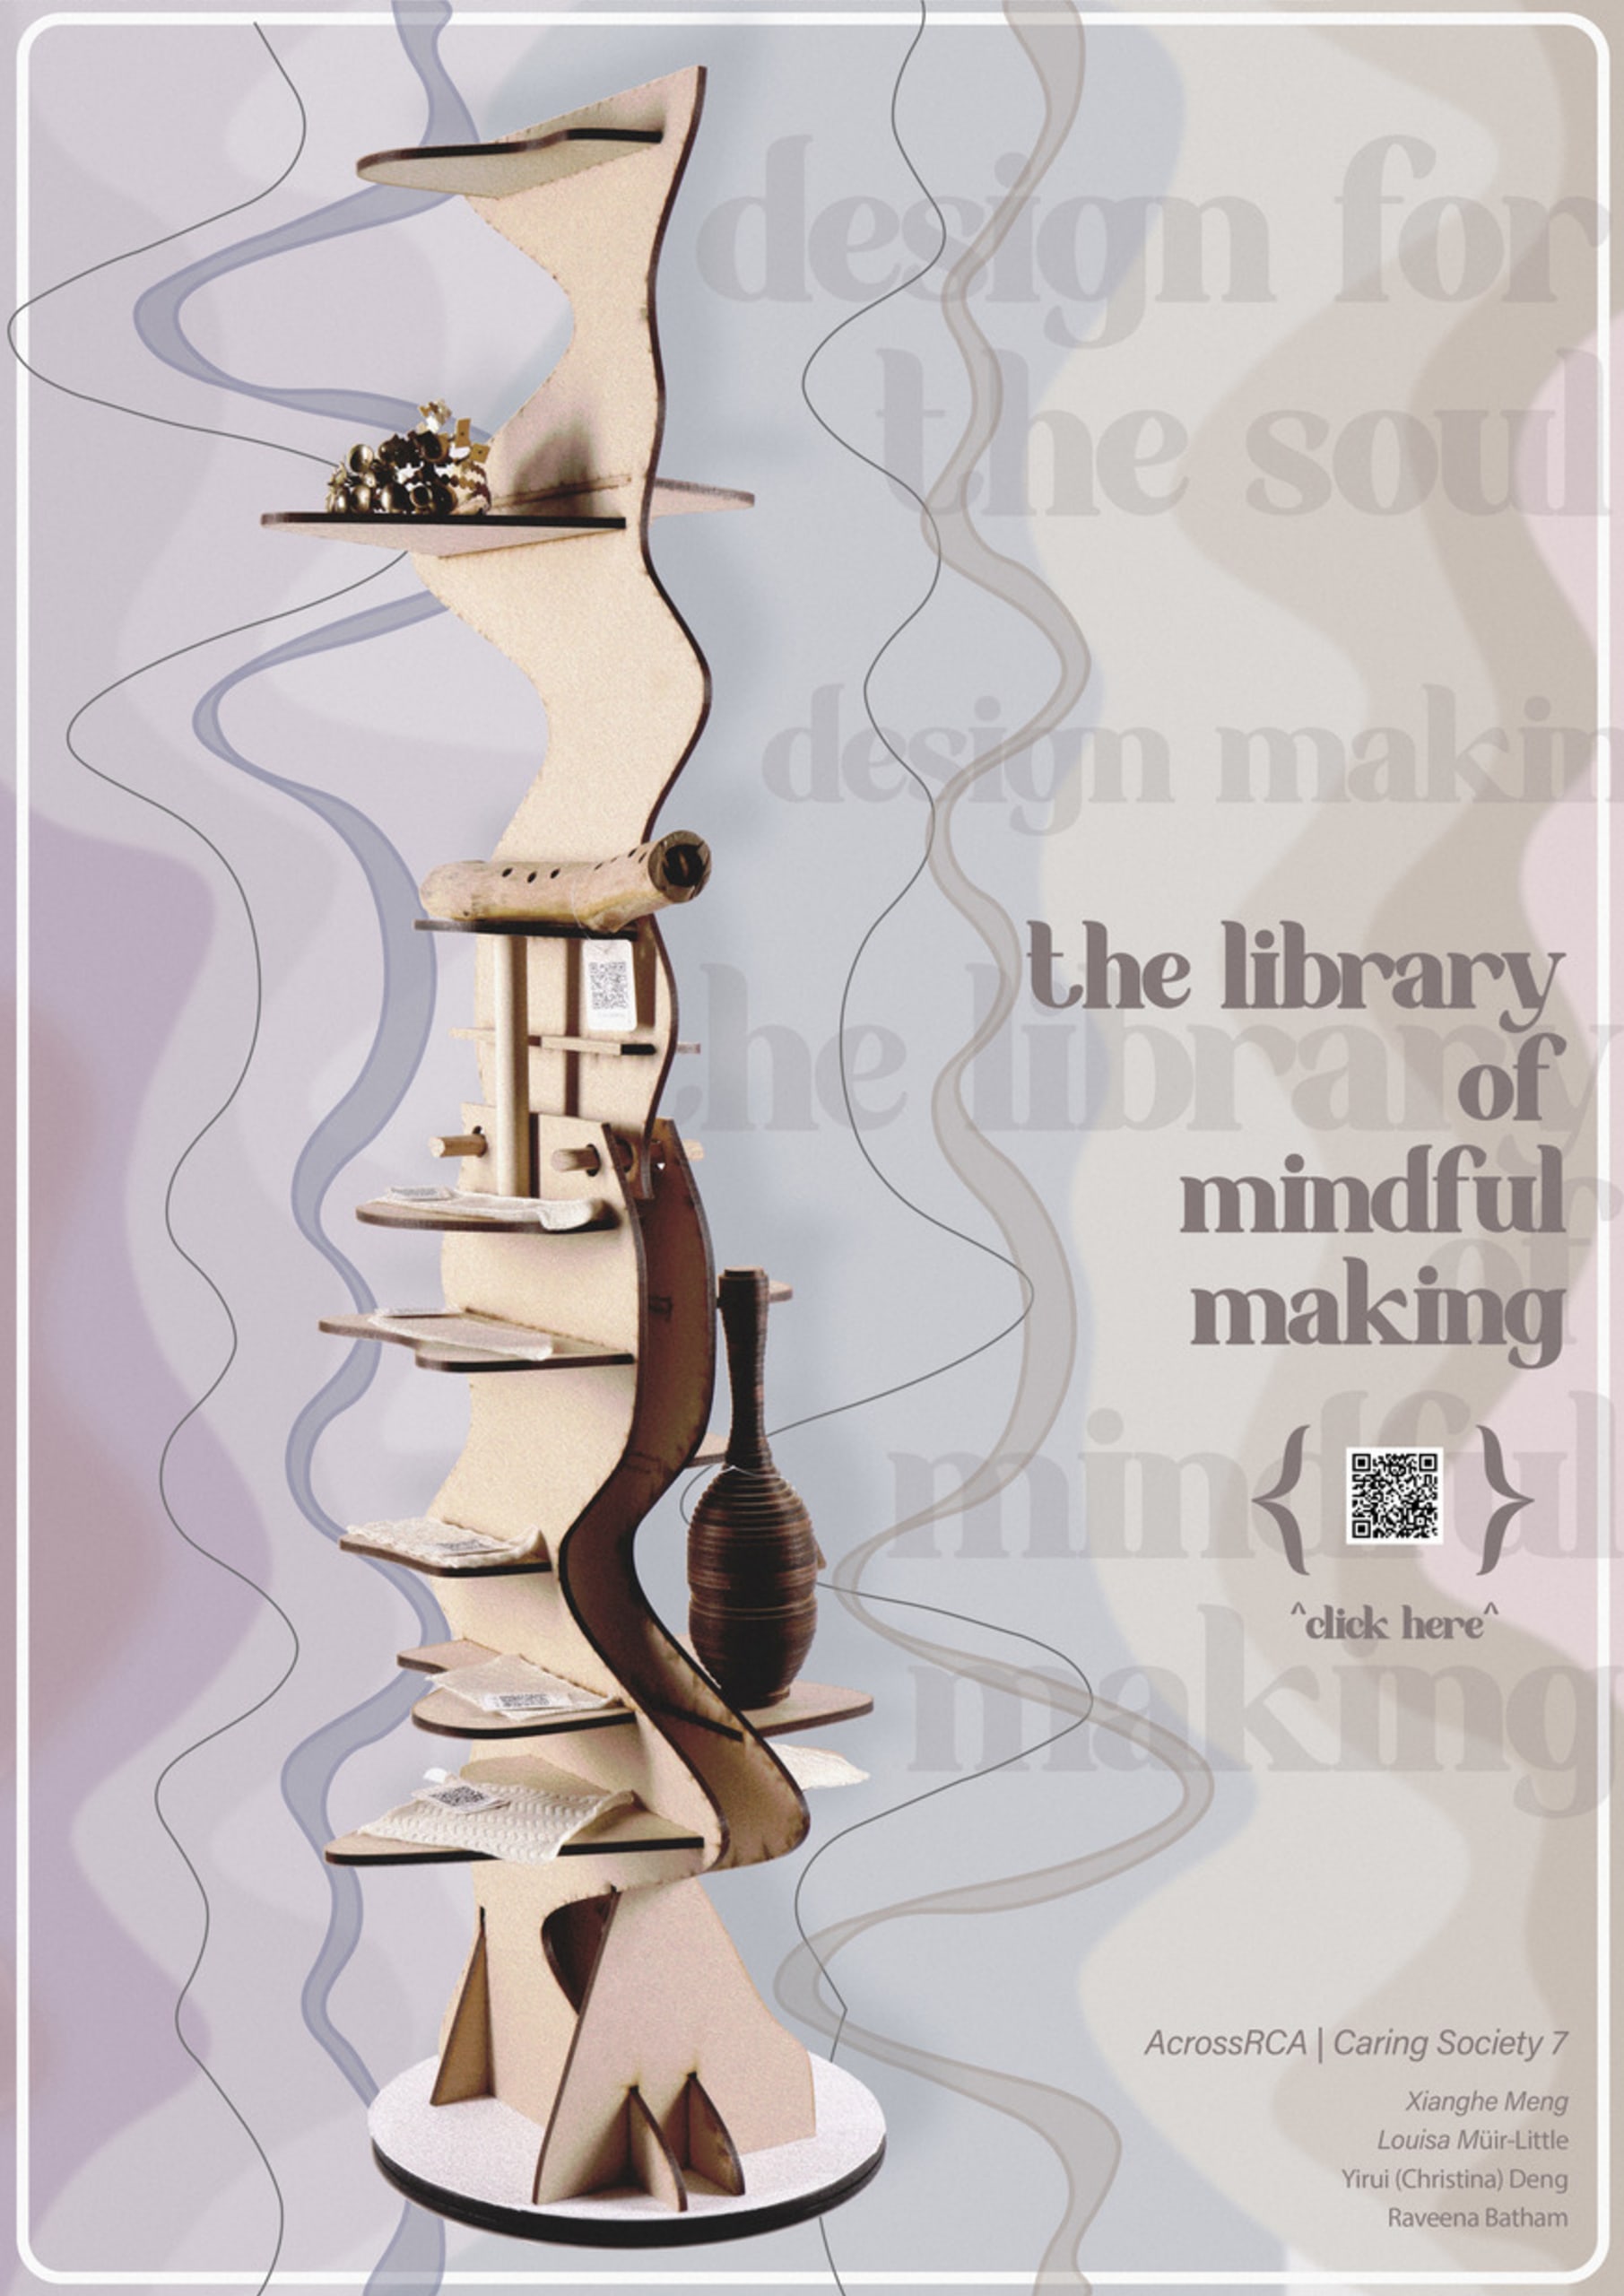 A poster of the "library of mindful making" with a QR code that links to the advertisement.